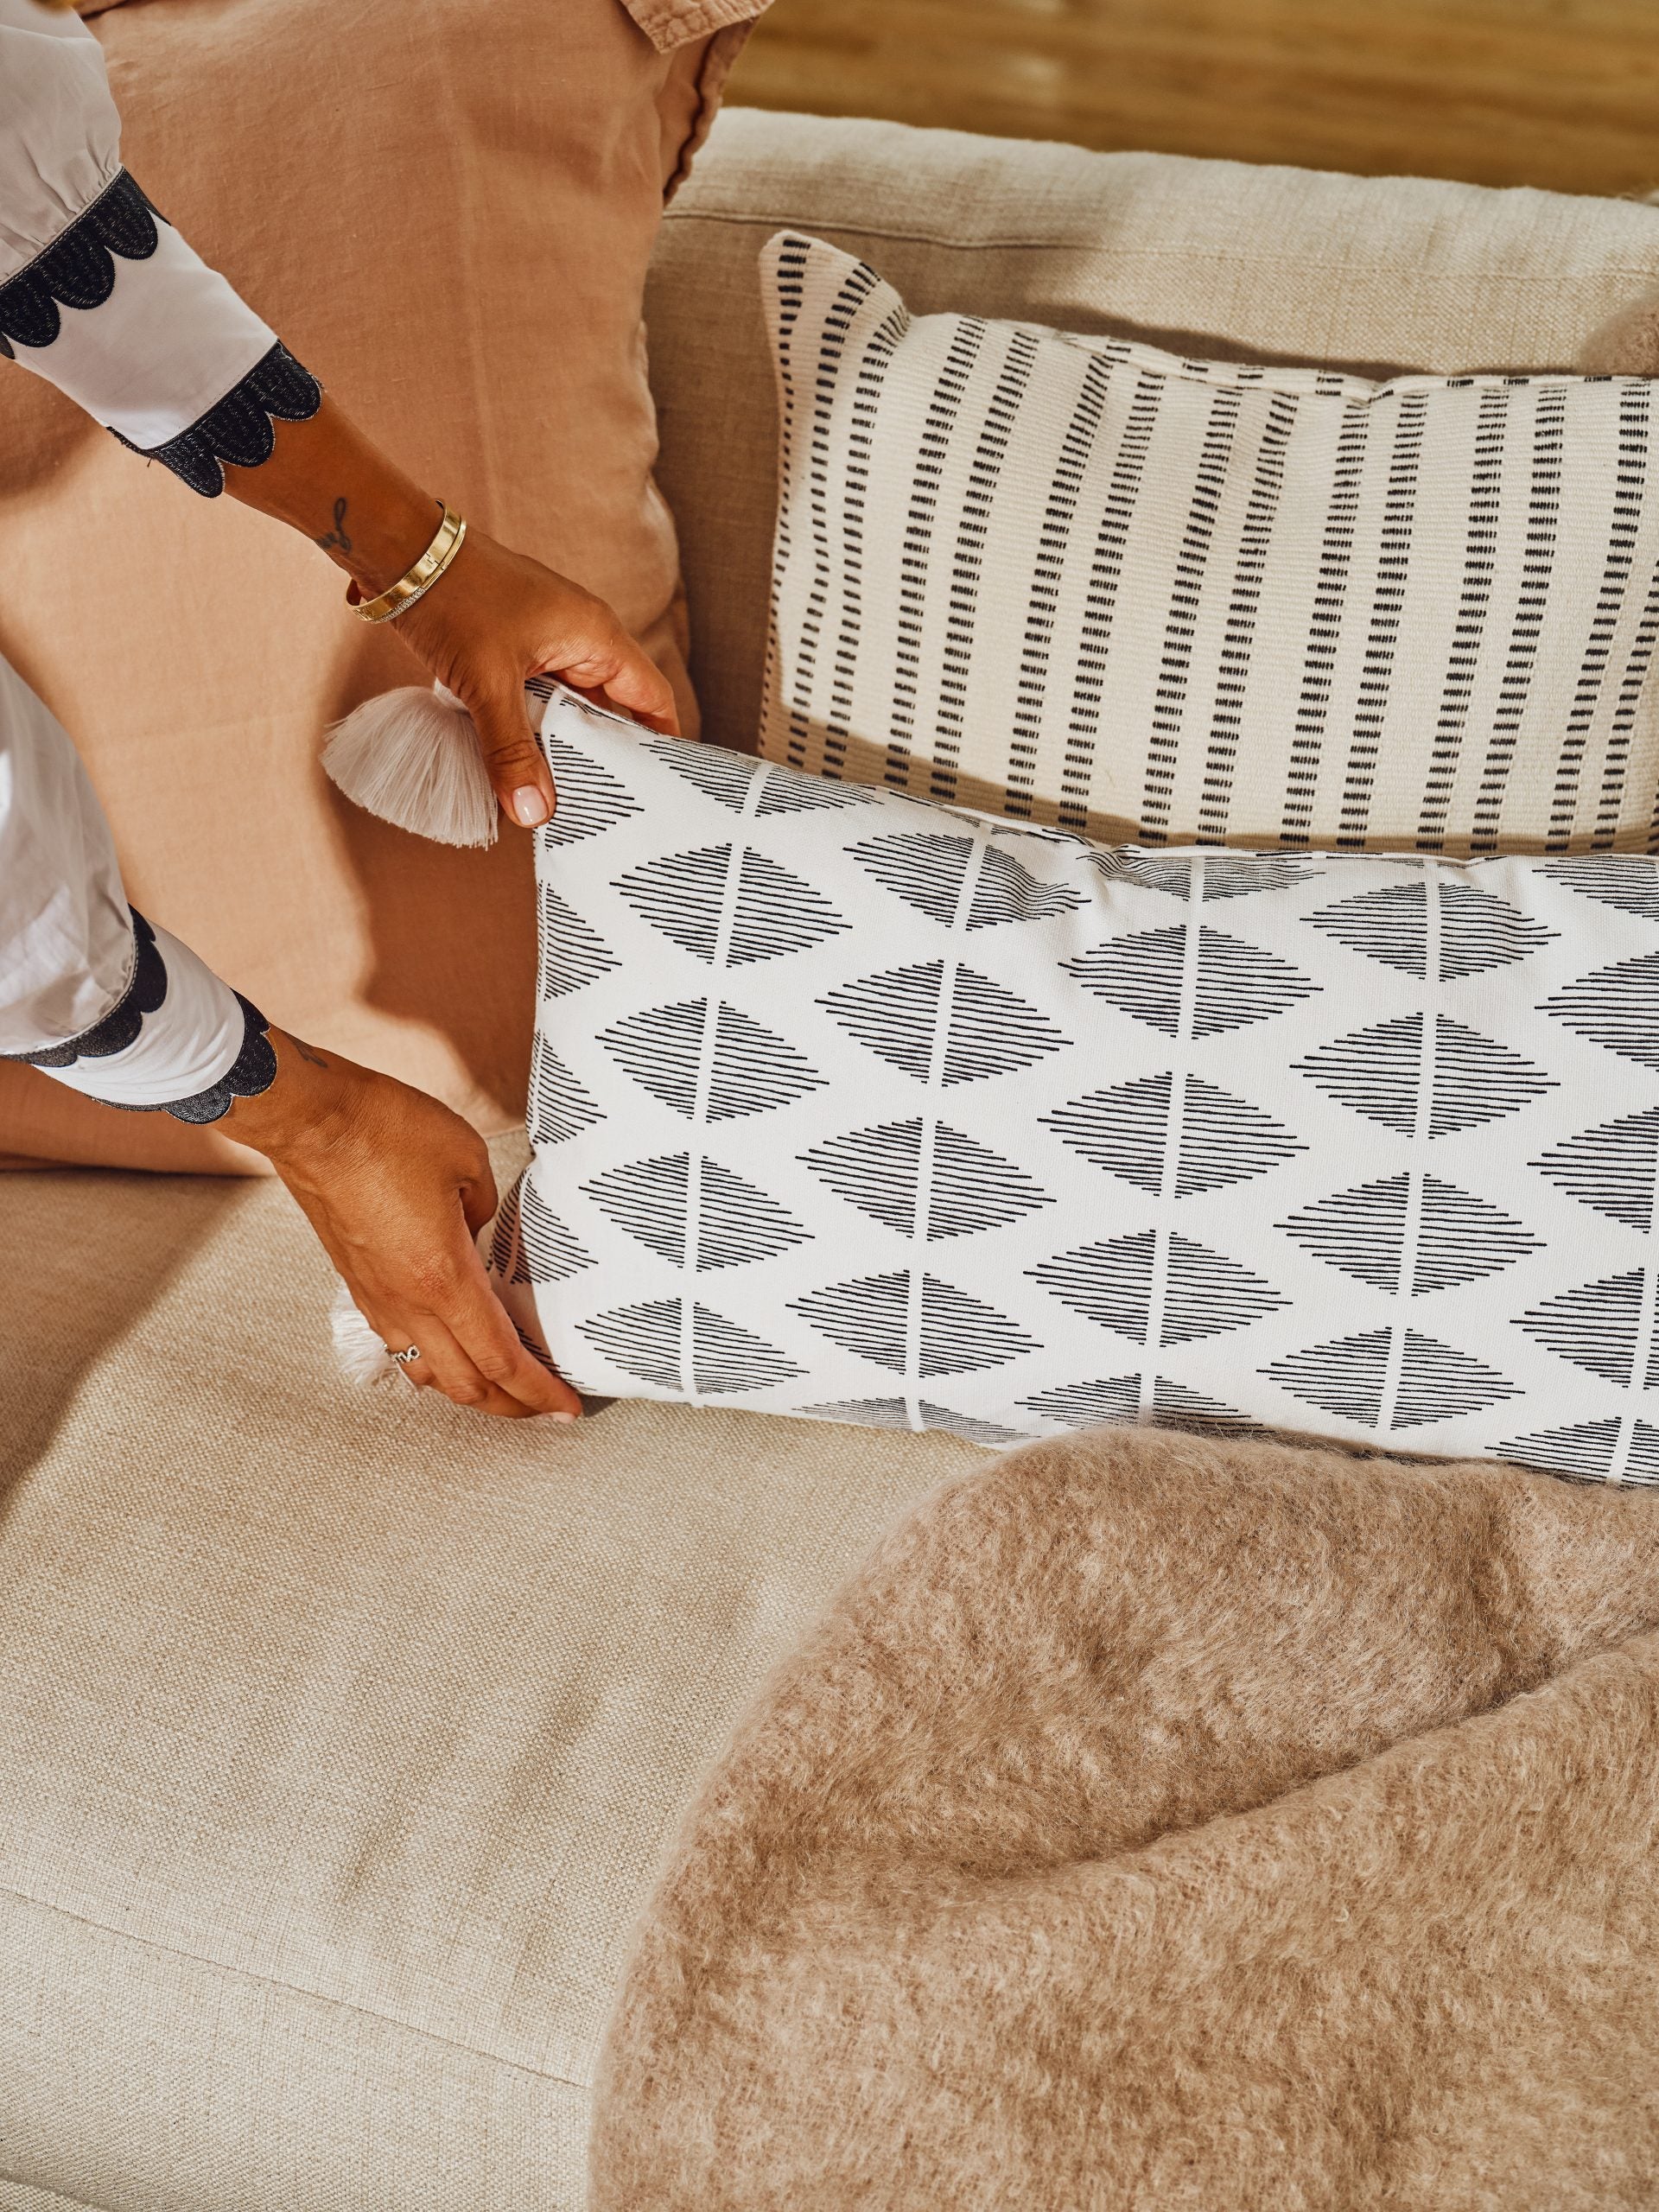 Tia Mowry-Hardrict Partners With Etsy For A New Home Decor Collection